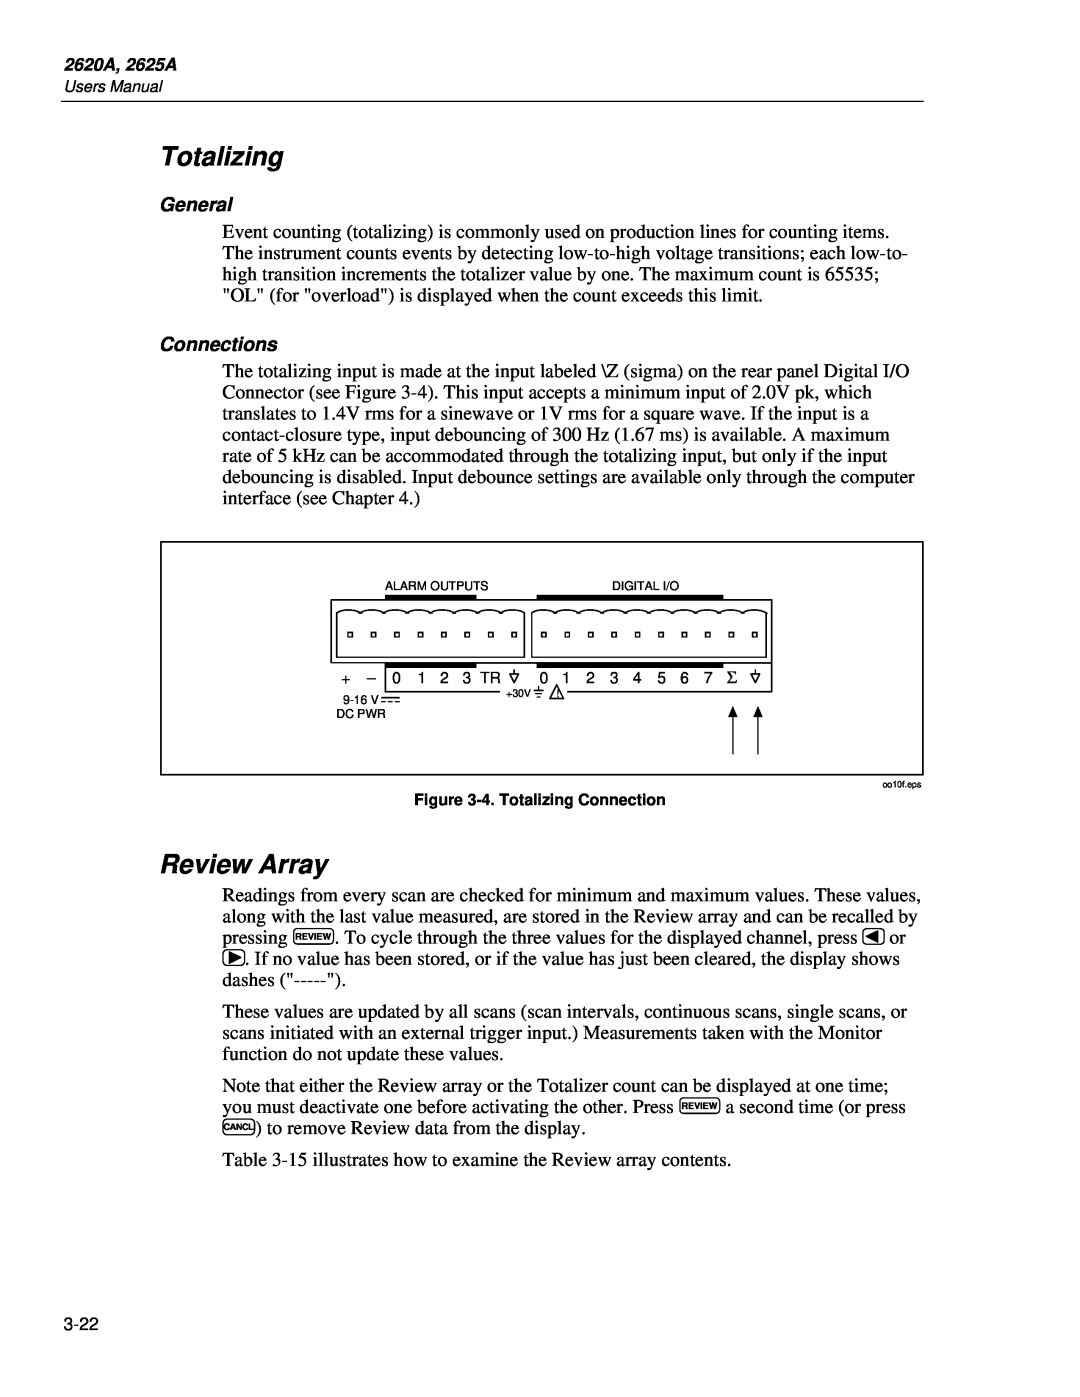 Fluke 2625A, 2620A user manual Totalizing, Review Array, General, Connections 